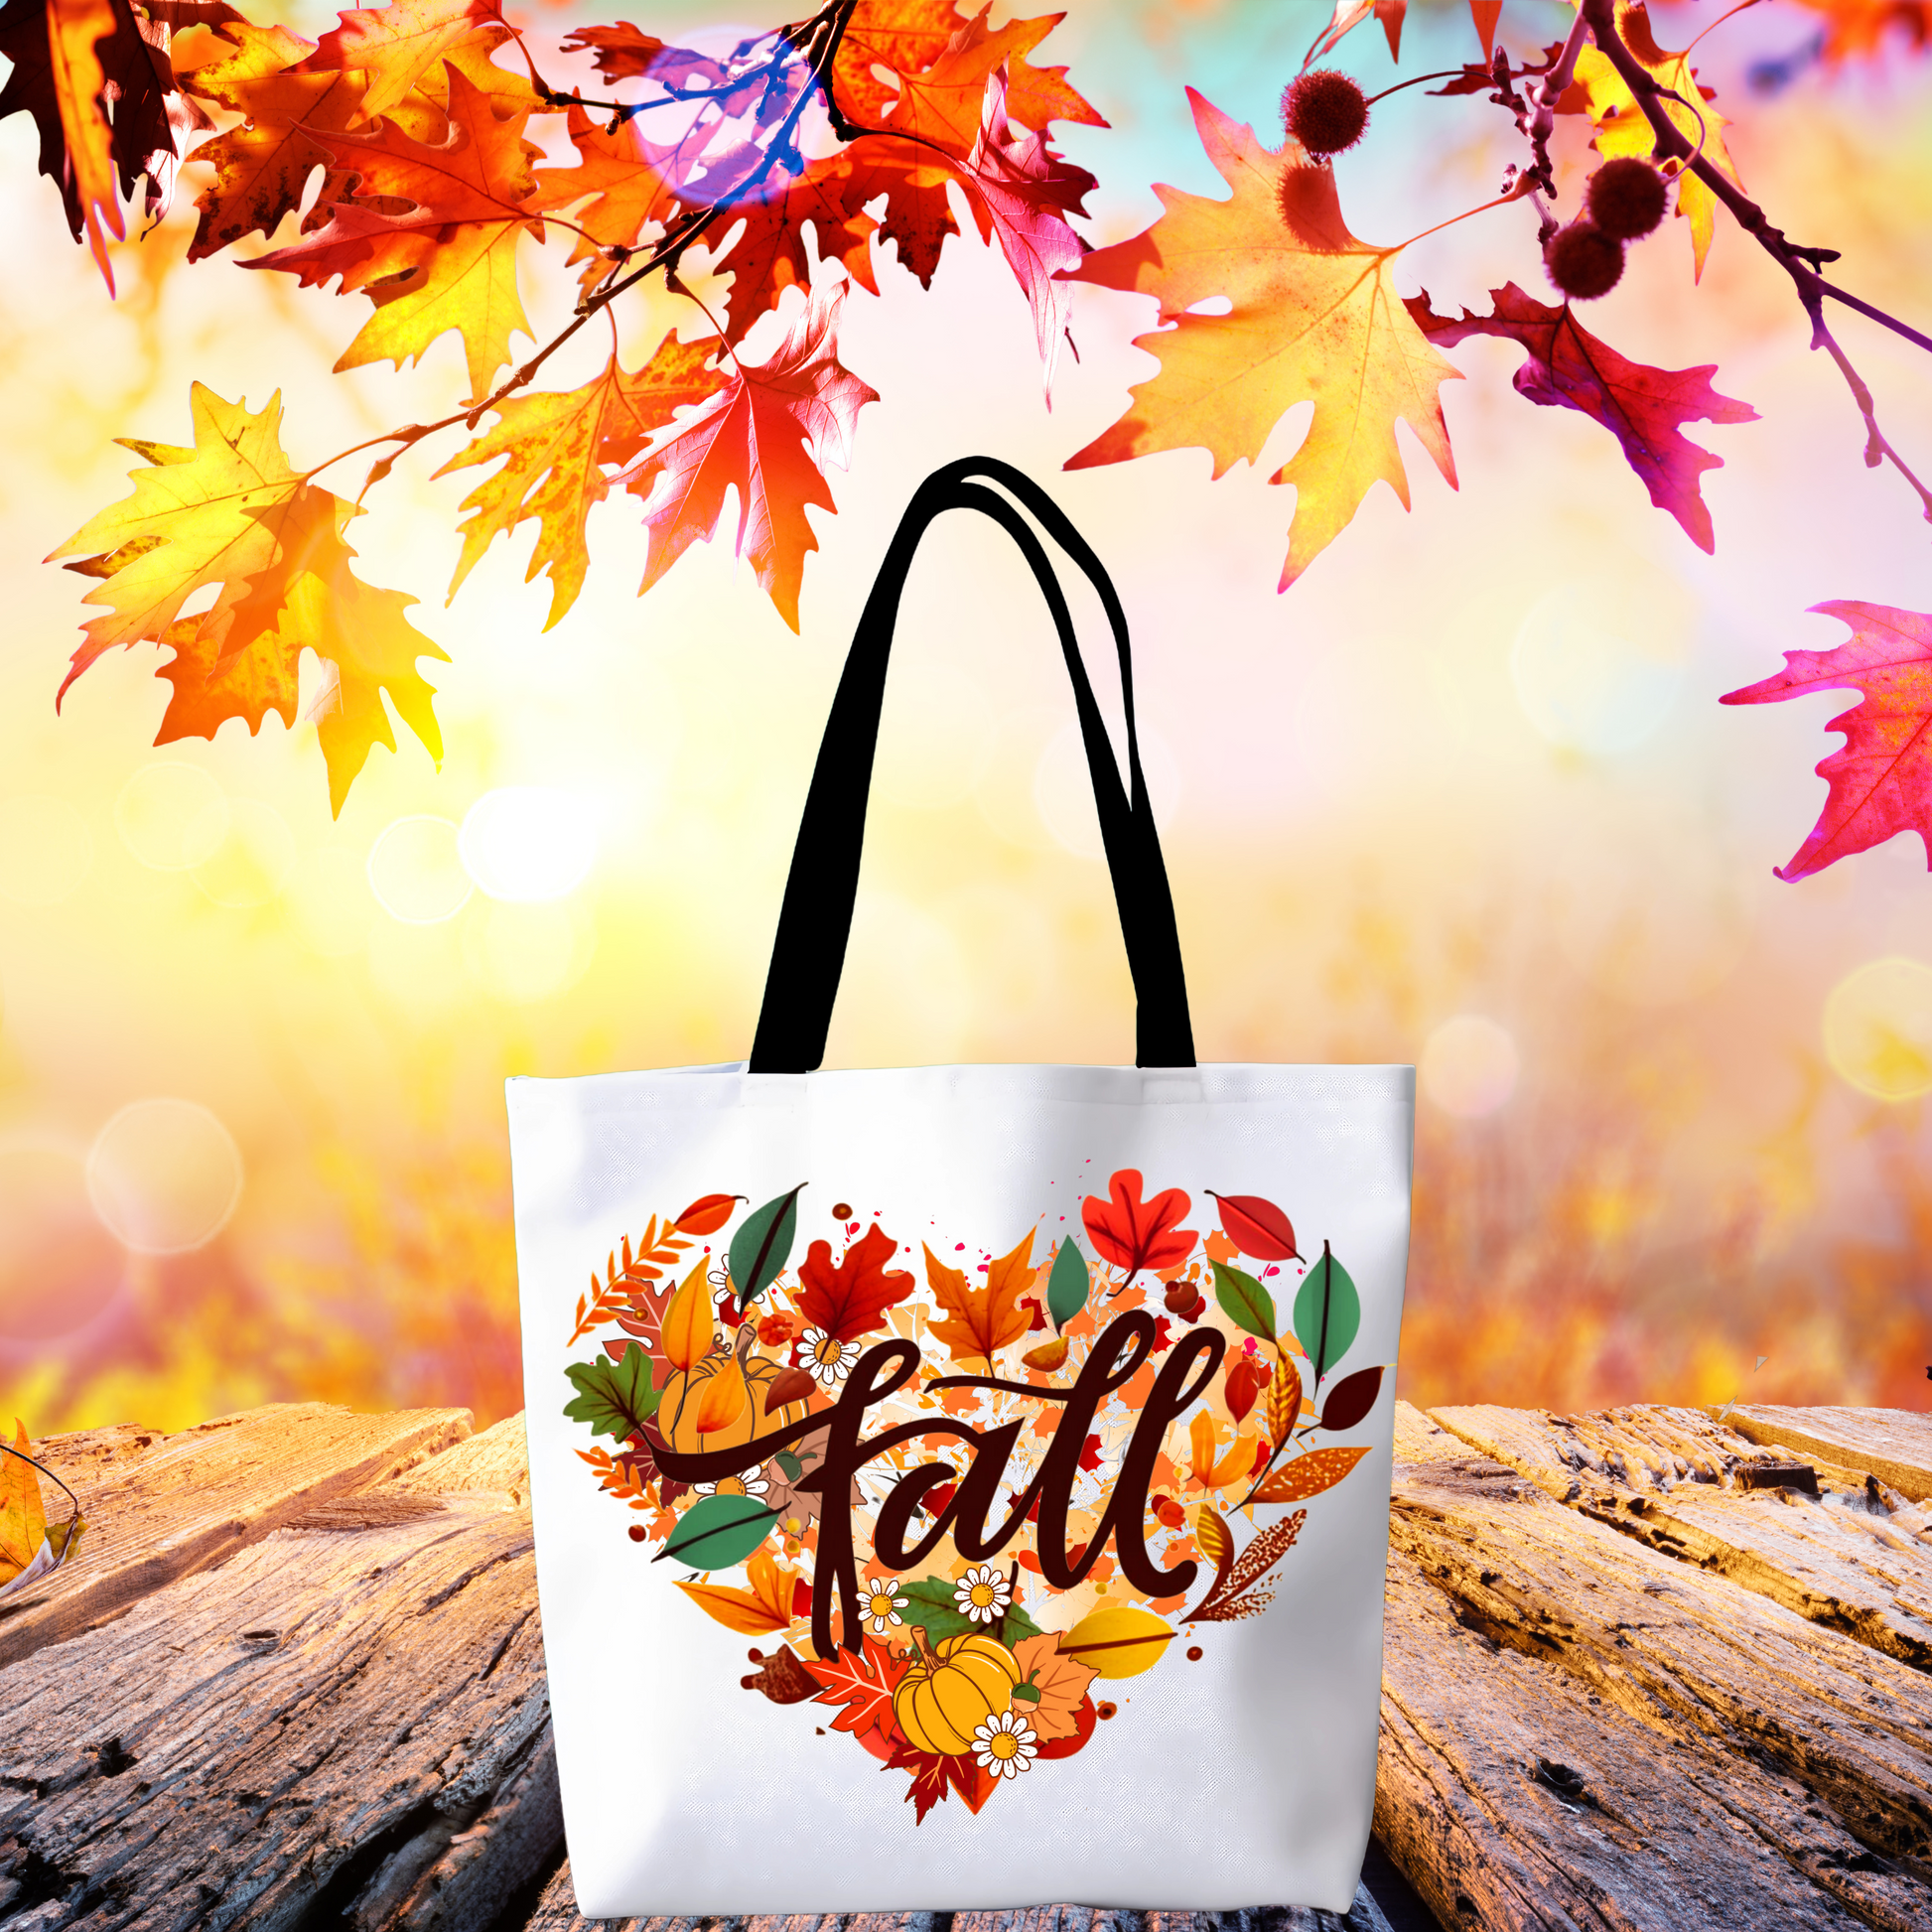 Love Fall Tote Bag - Pumpkin Style, Fall Shoulder Chic, Autumn Vibes, Theme Tote, Leaves Elegance, Gift for Her - Stylish Fall Bag Accessories   